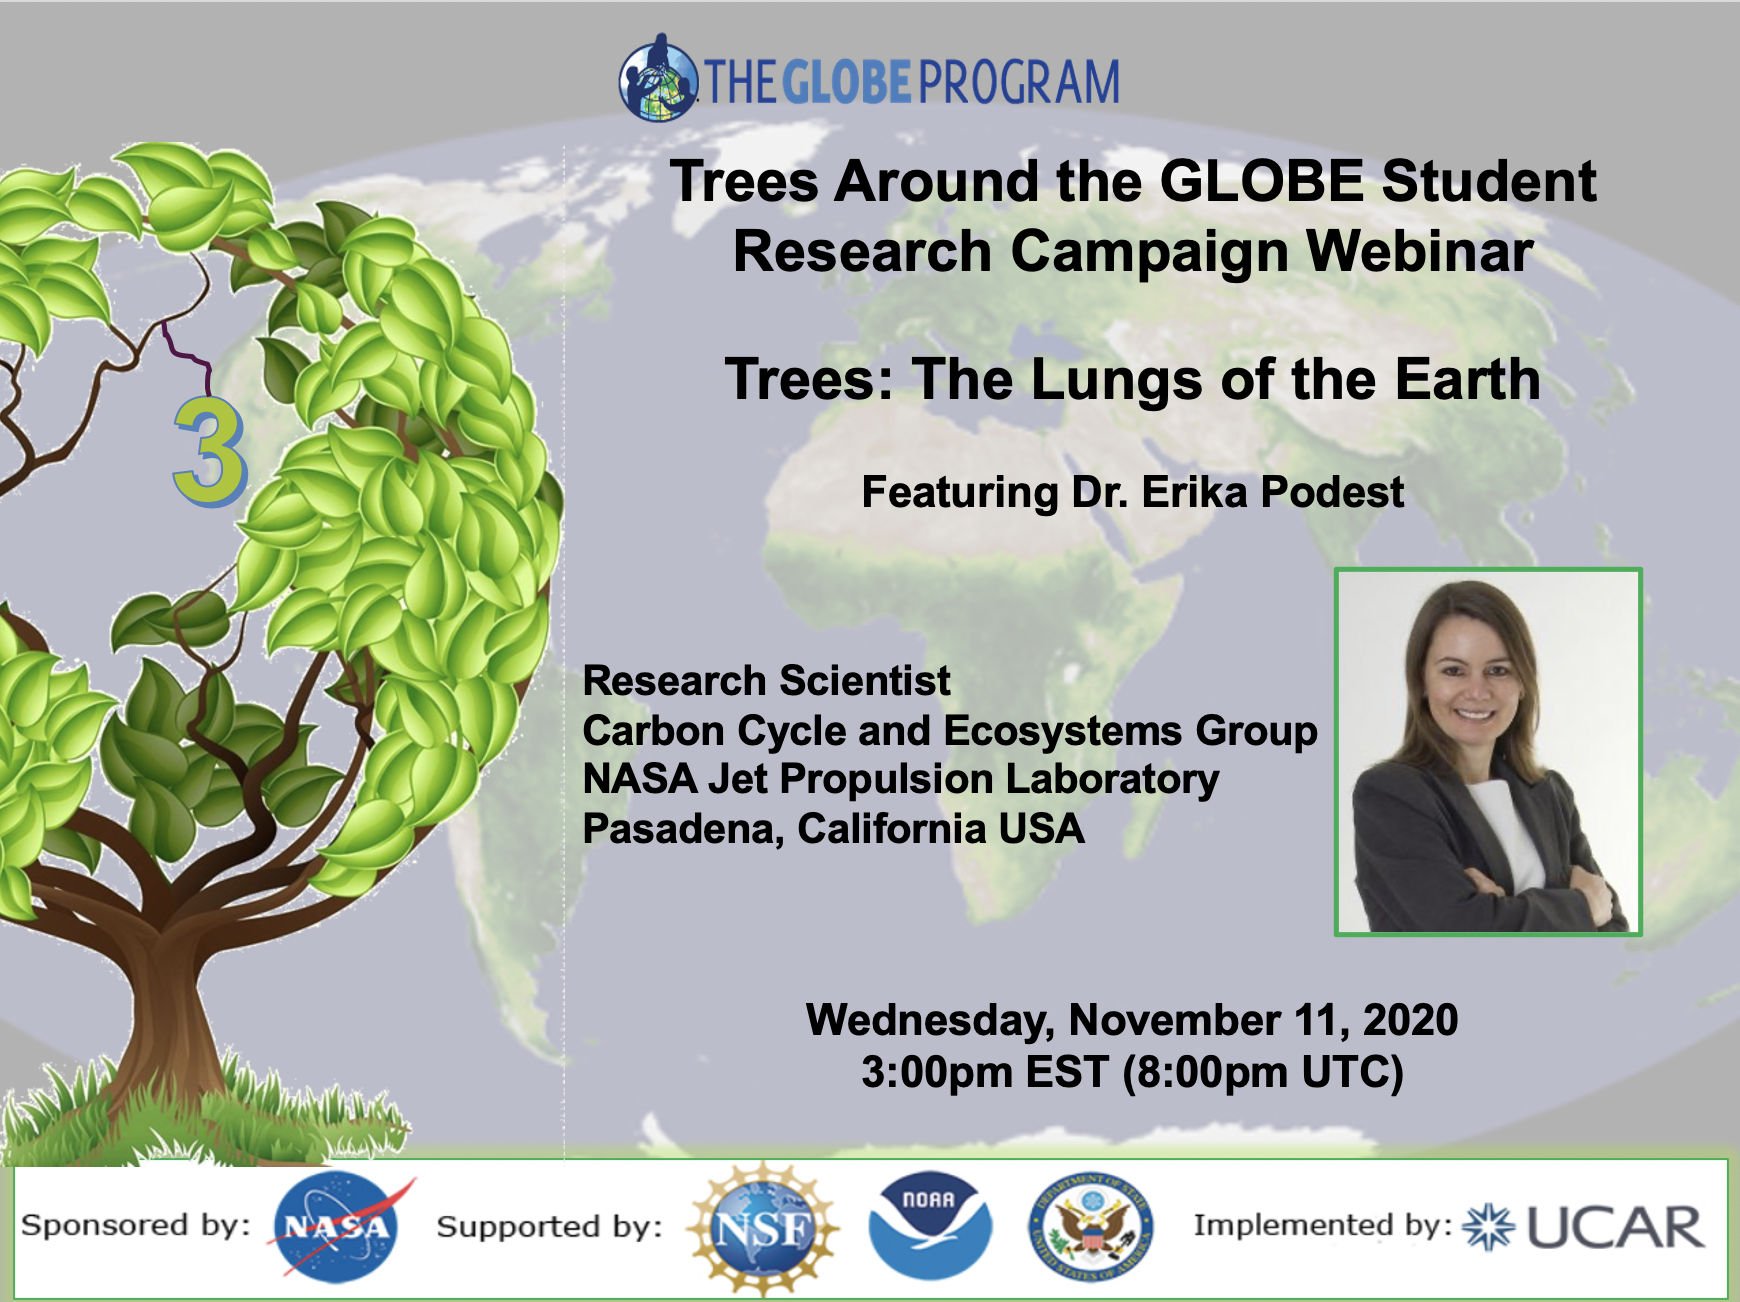 Trees Around the GLOBE Student Research Campaign 11 November 2020 webinar shareable